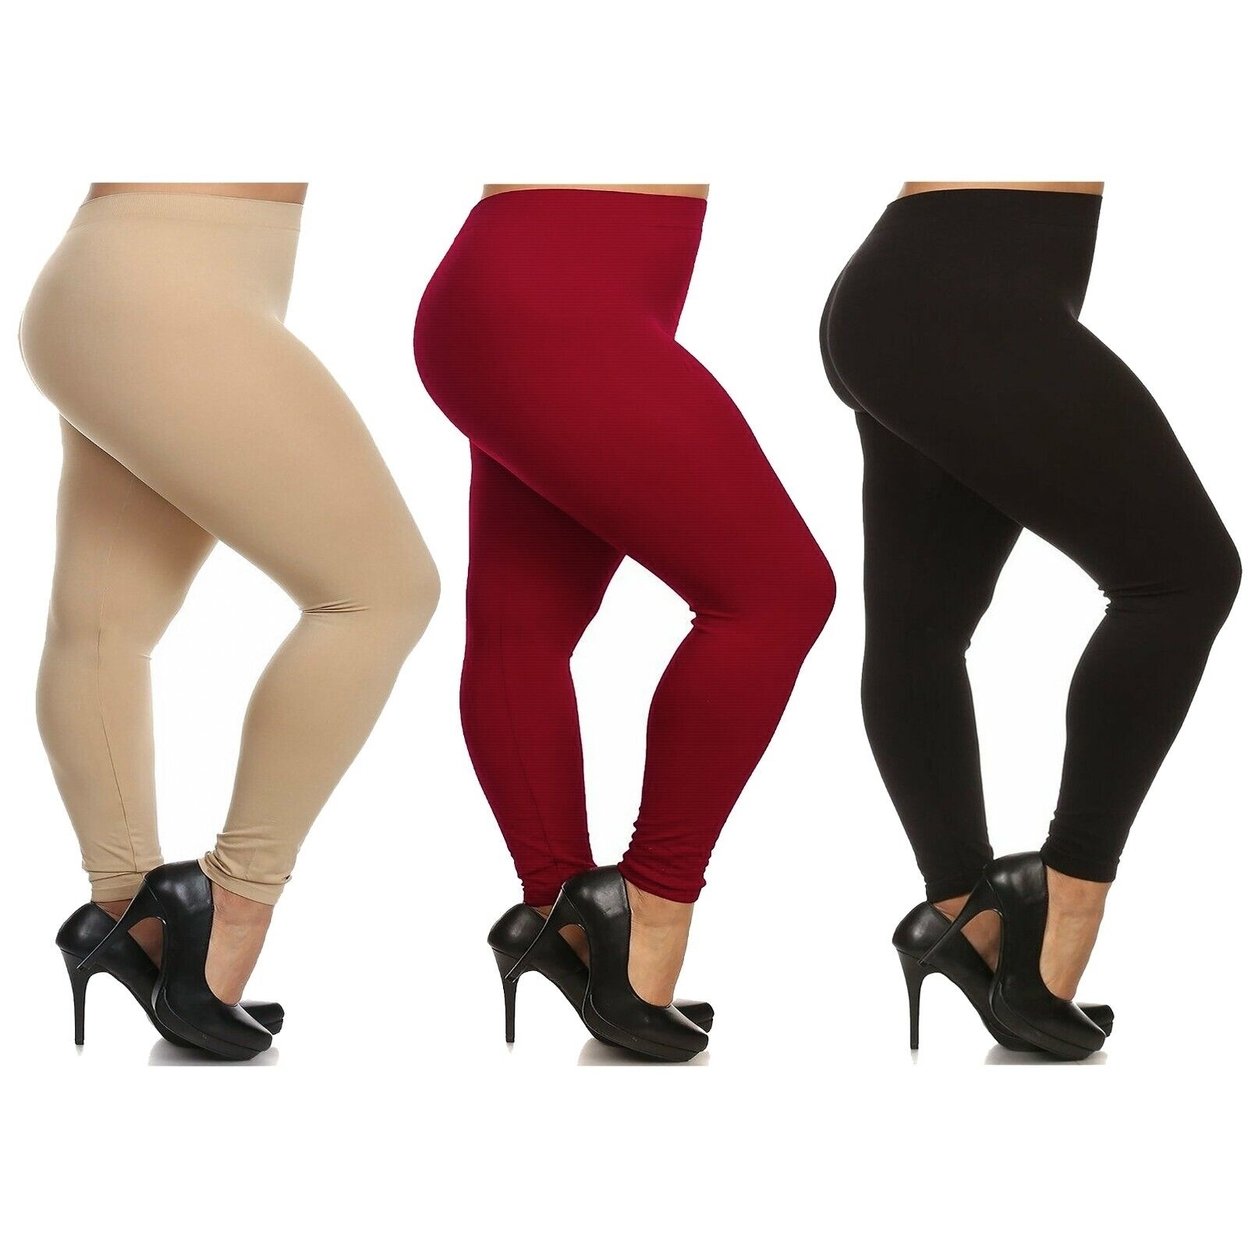 Women's Casual Ultra Soft Smooth High Waisted Athletic Active Yoga Leggings Plus Size Available - Black, 4x